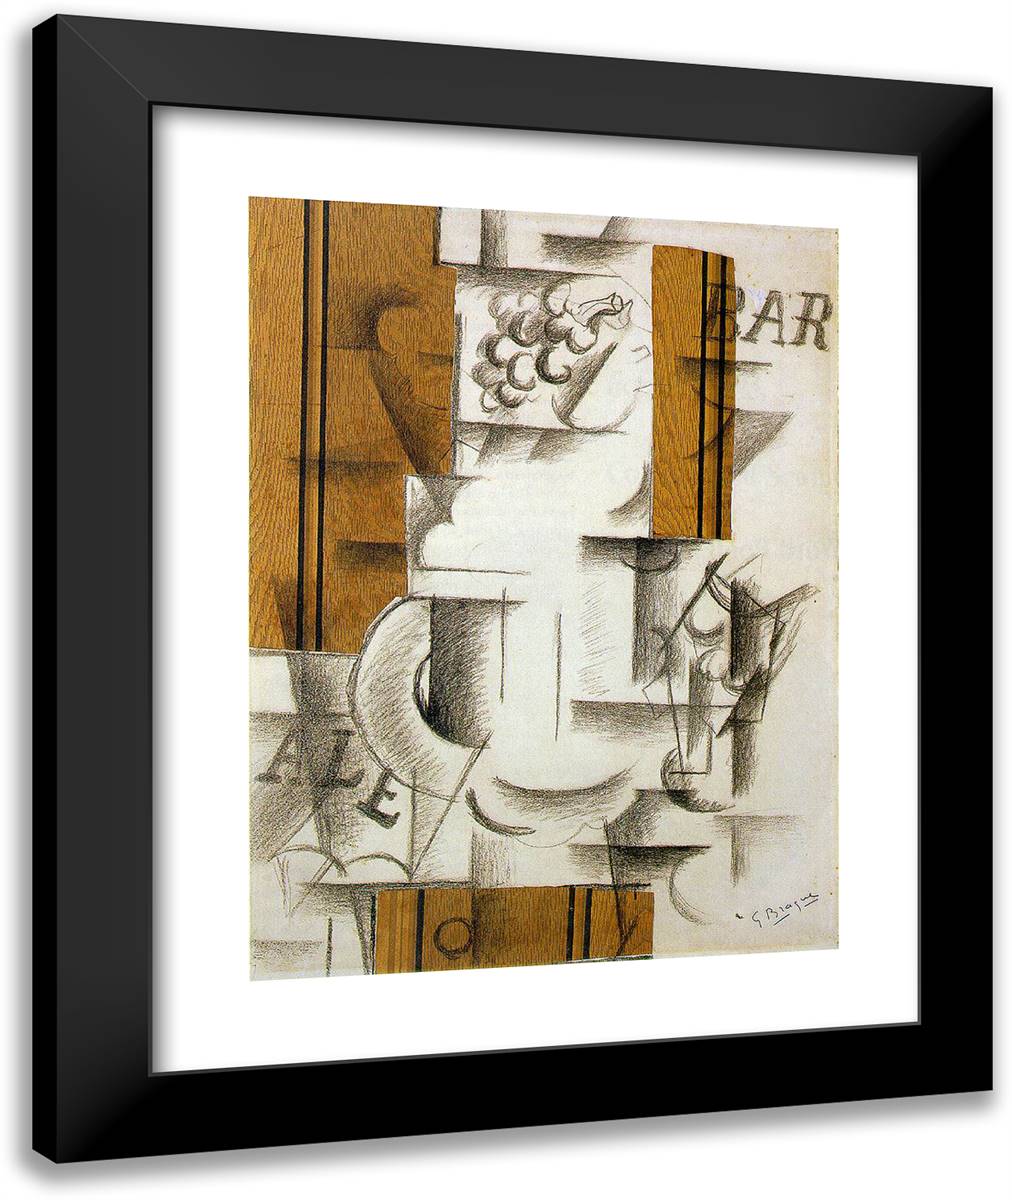 Fruitdish and Glass 20x24 Black Modern Wood Framed Art Print Poster by Braque, Georges